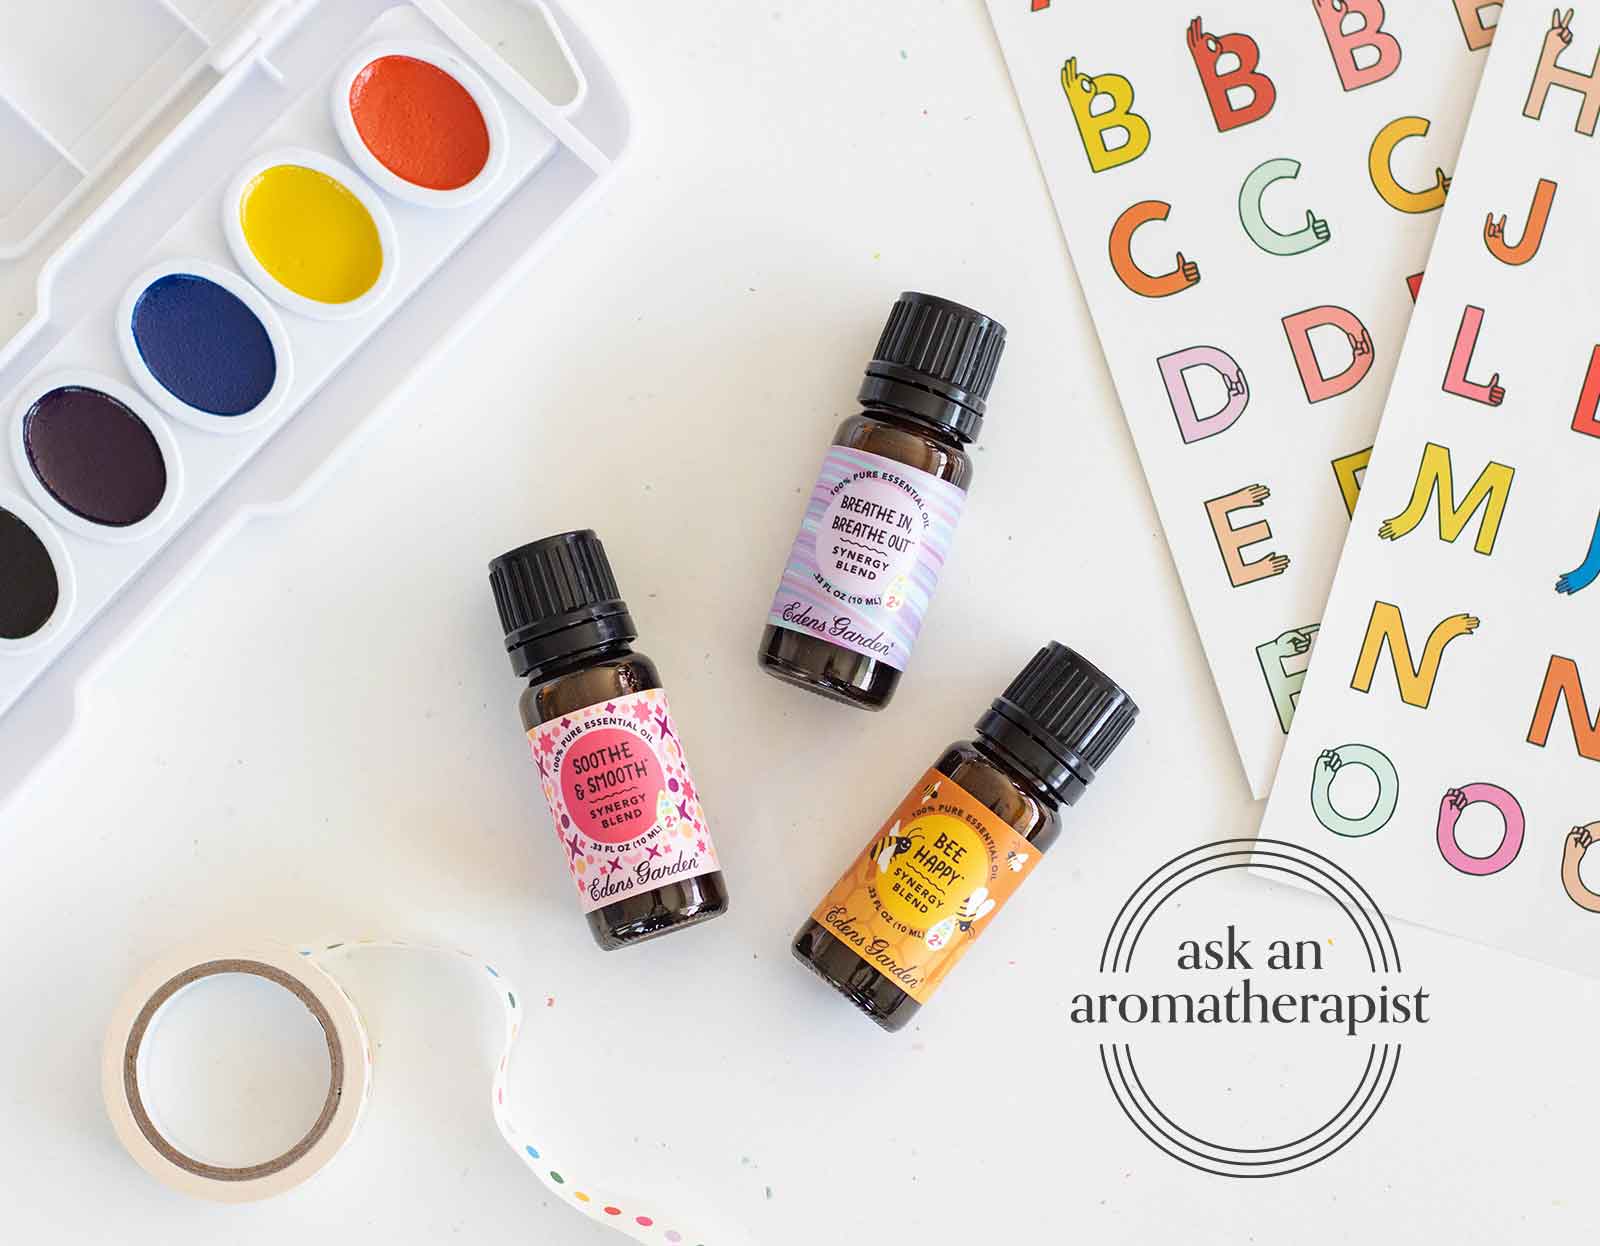 AAA: Which Essential Oil Blends Are Safe For Kids?